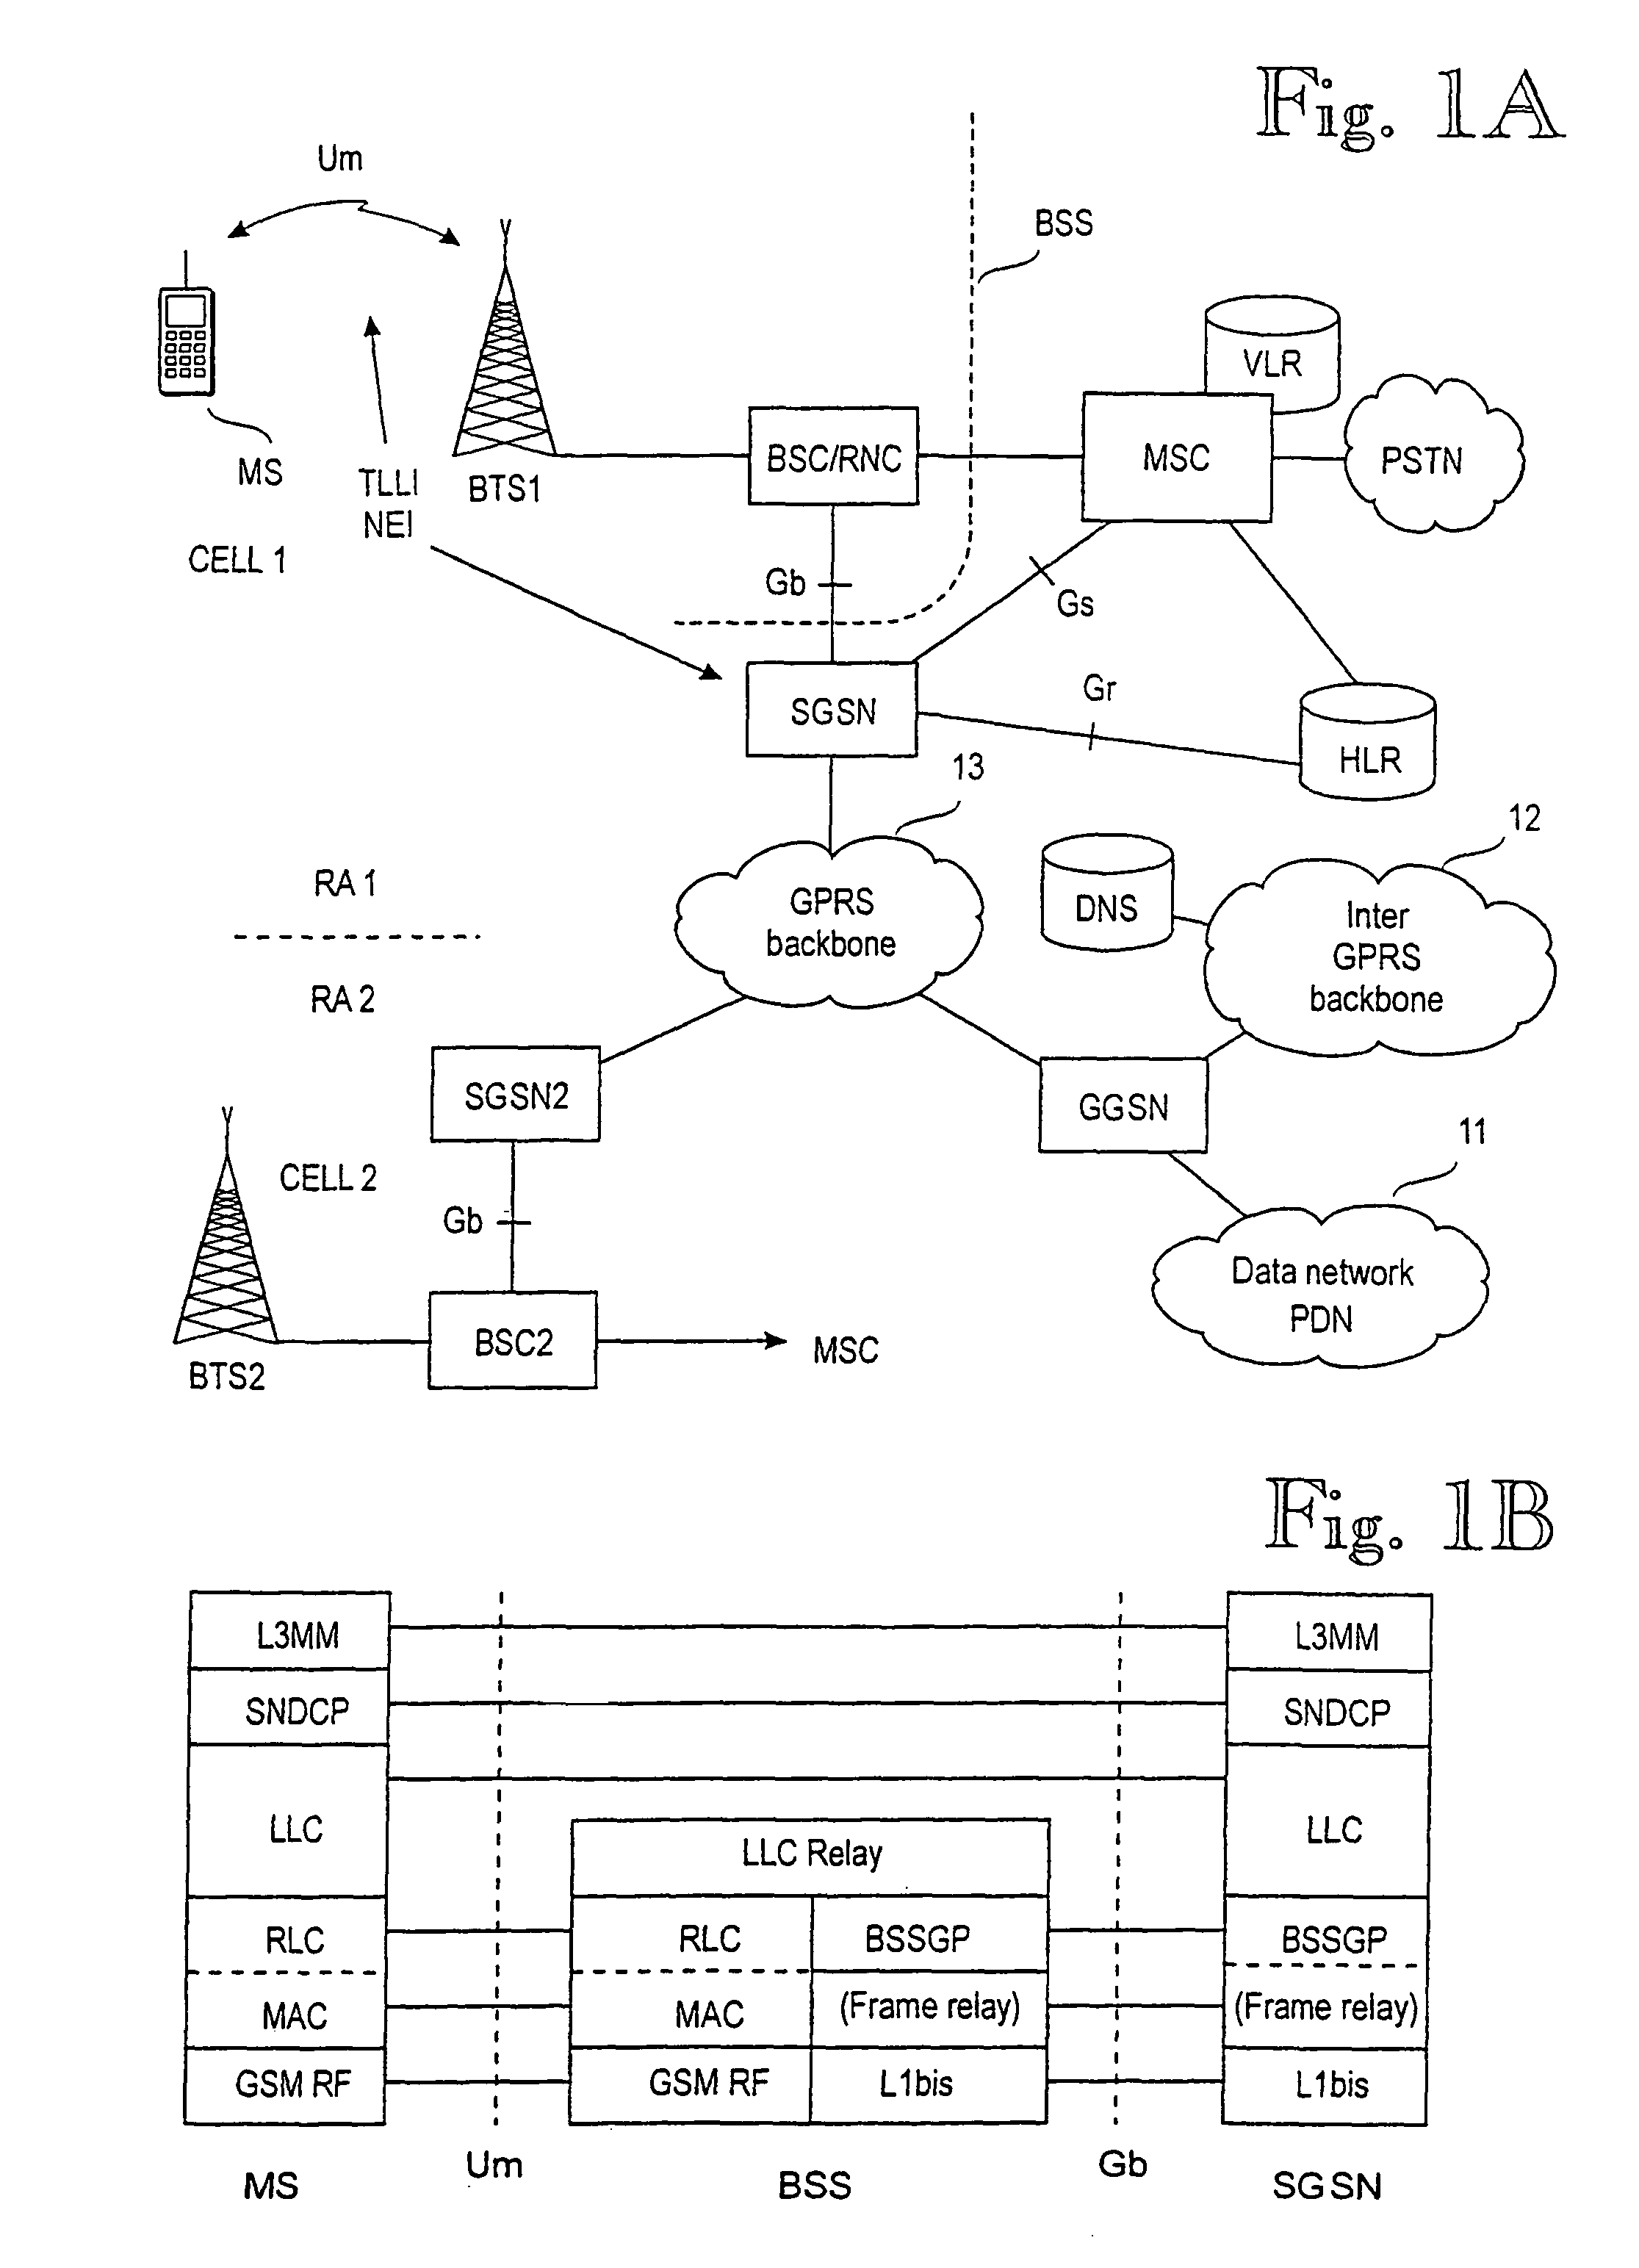 Identifying a mobile station in a packet radio network